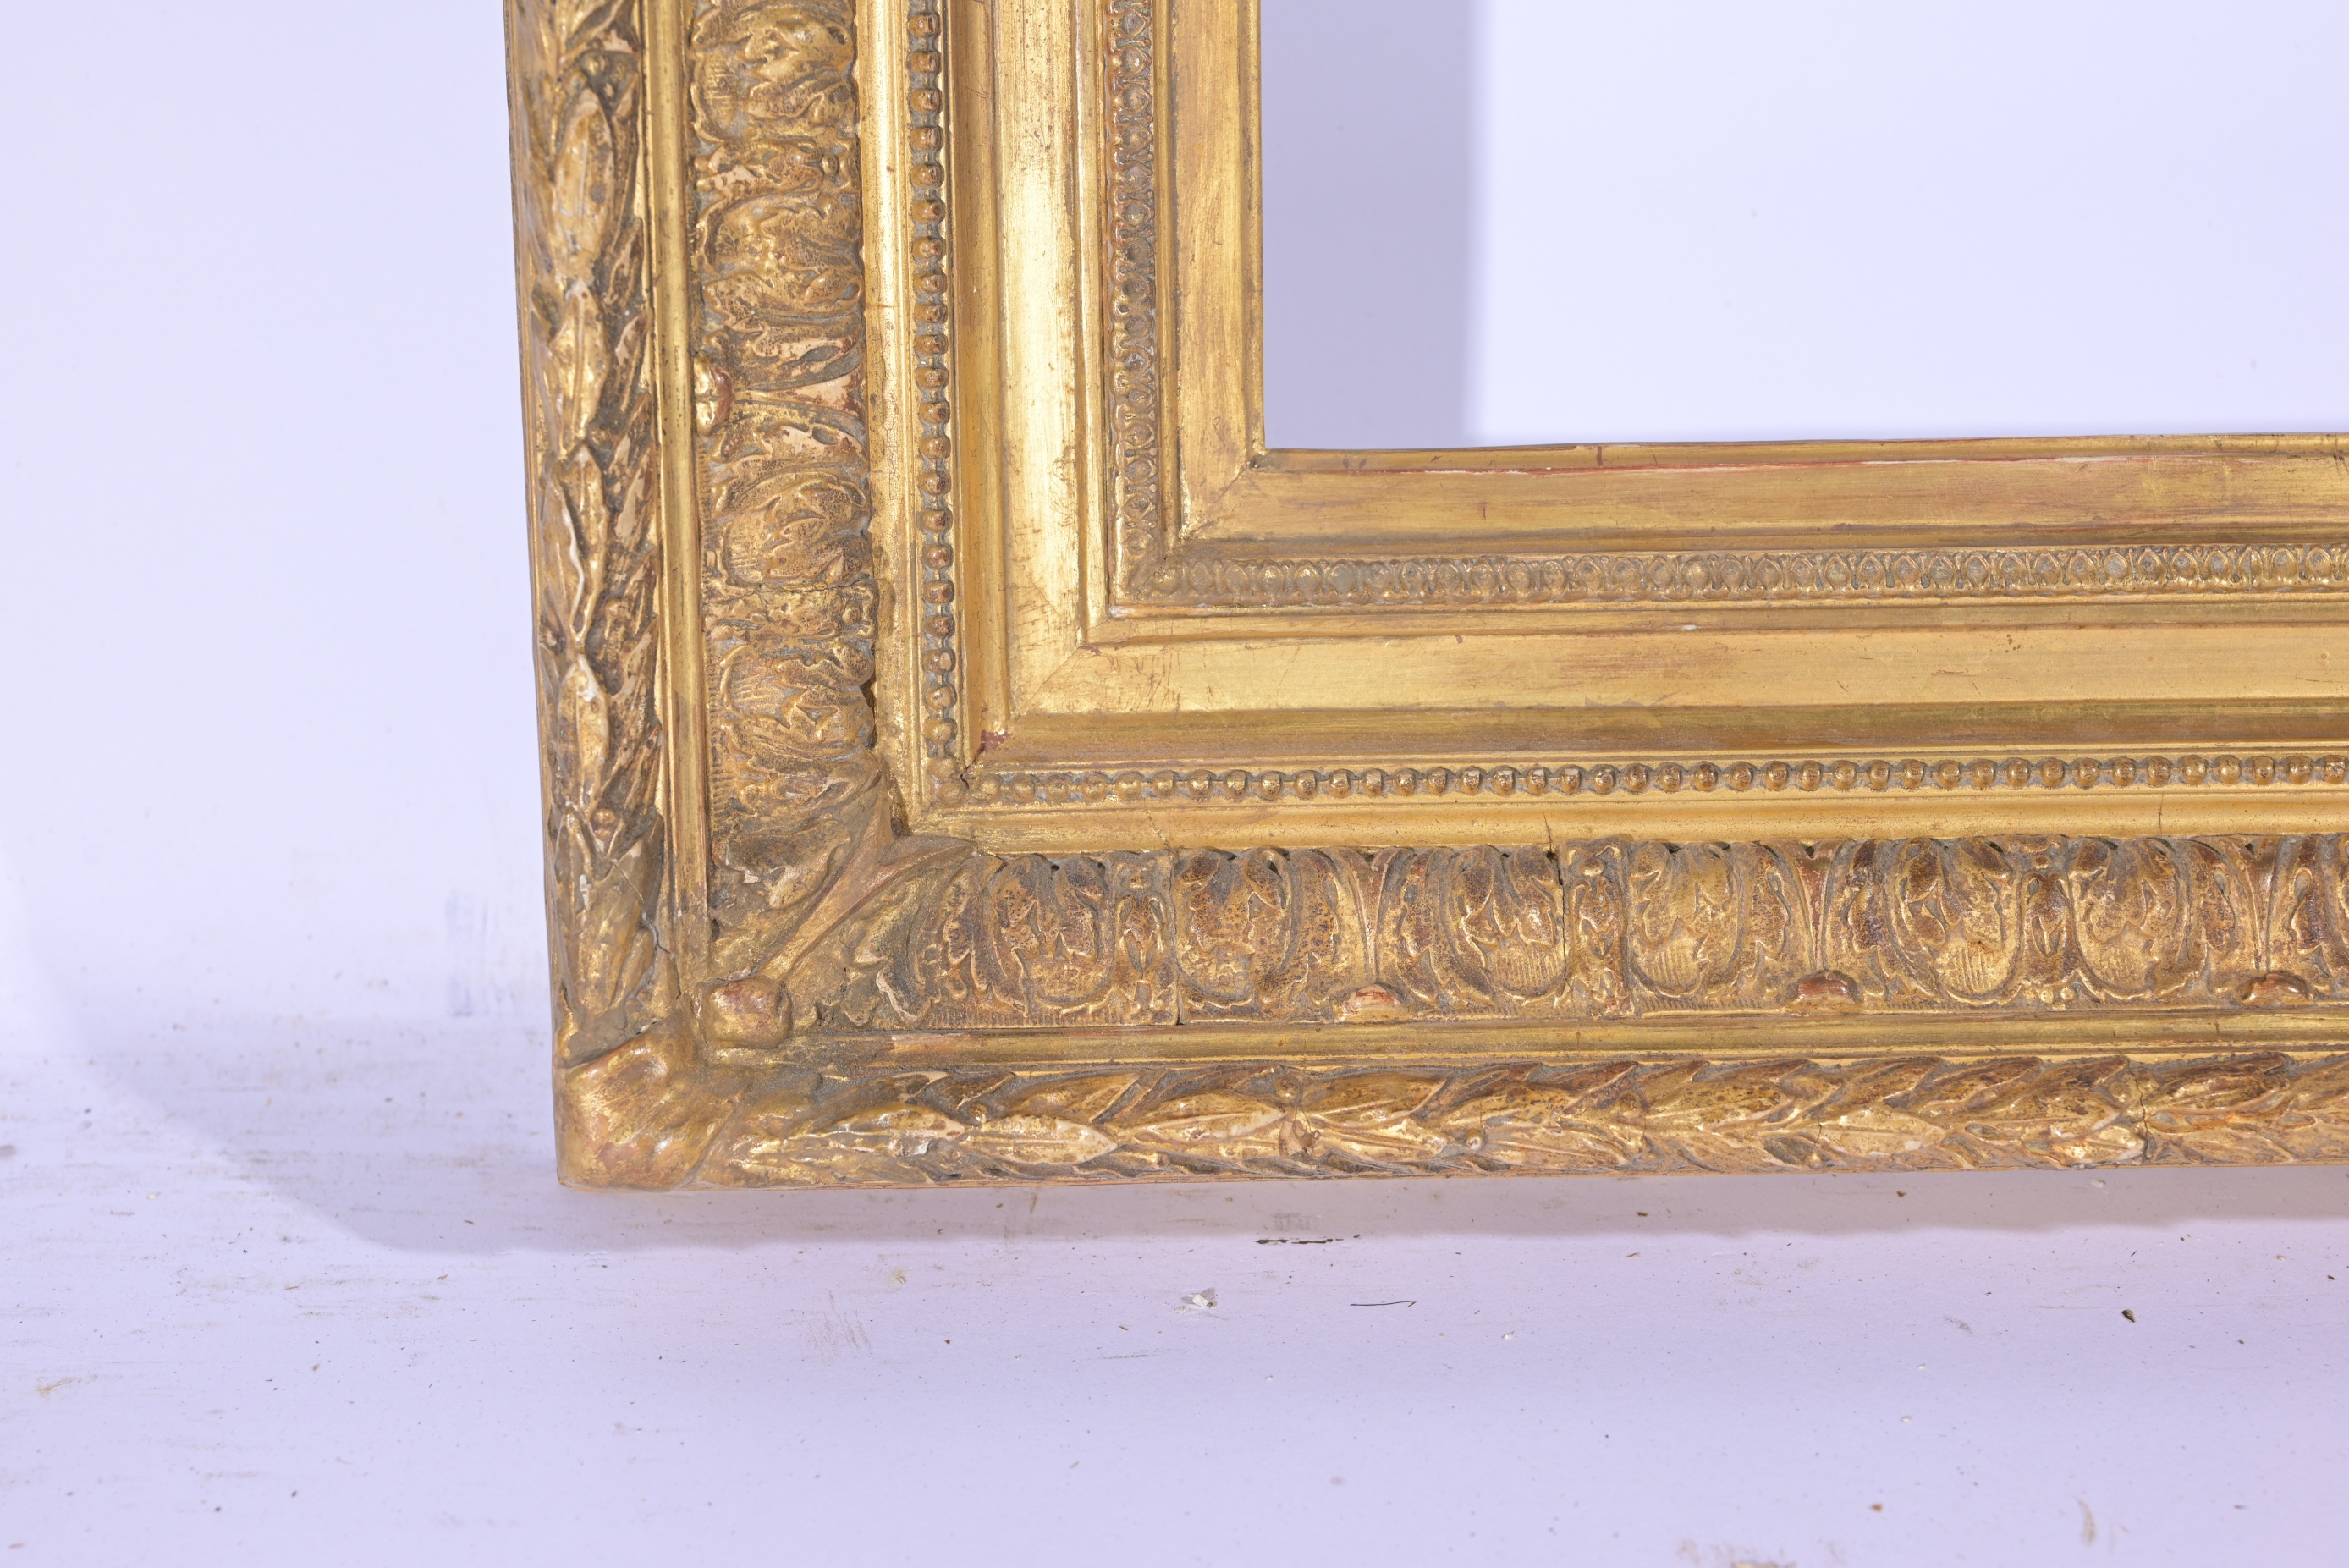 French,19th century Gilt Wood Frame - 28 x 18 - Image 6 of 9